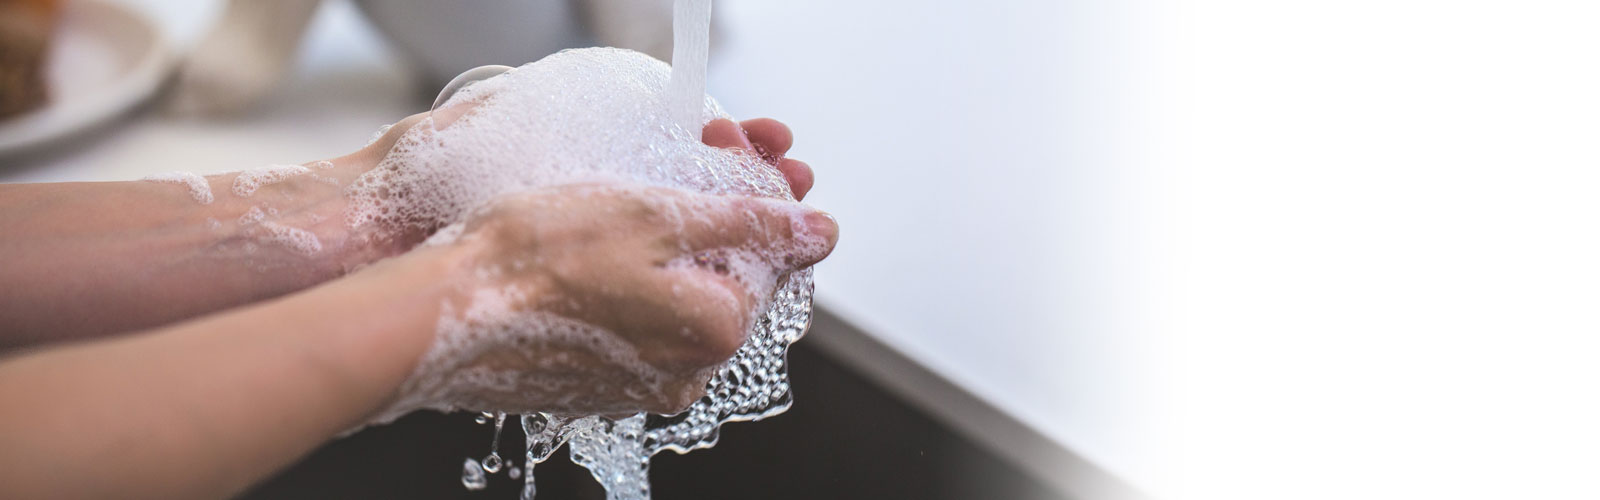 Hands covered in soap under a running tap